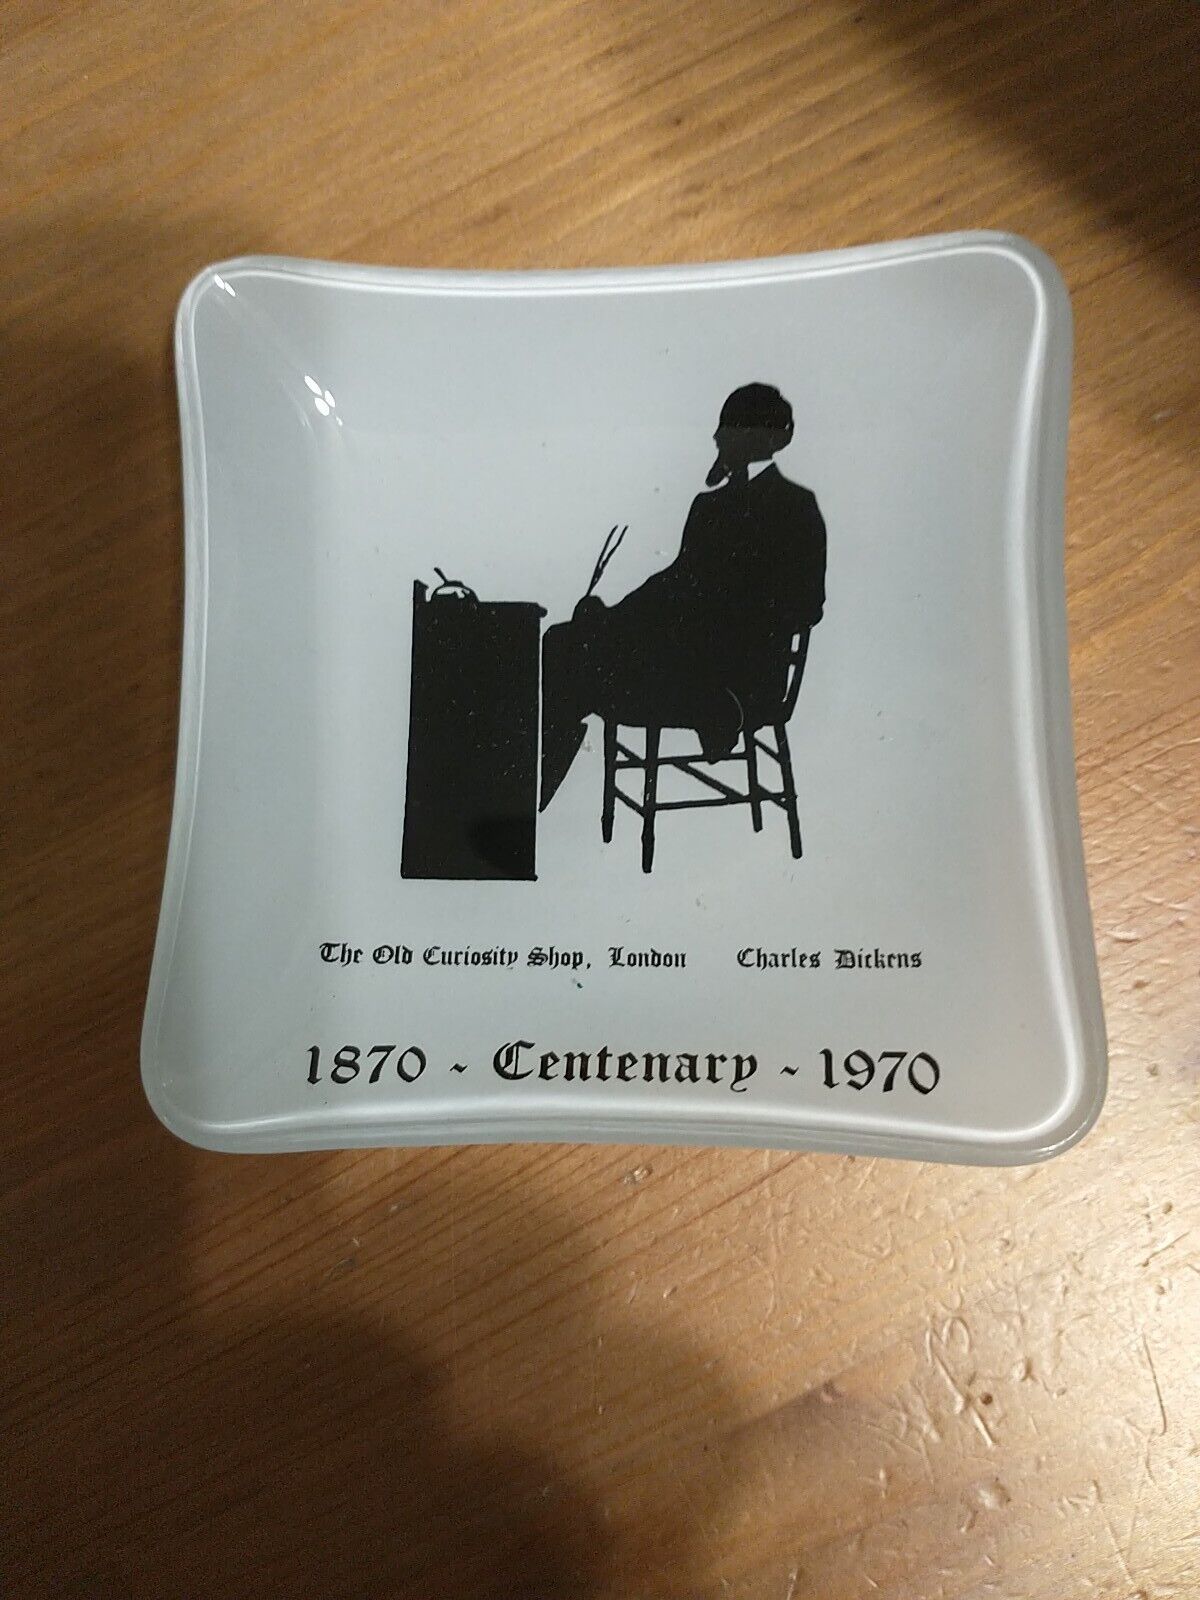 Small White Square Glass Ashtray Old Curiosity Shop London Charles Dickens